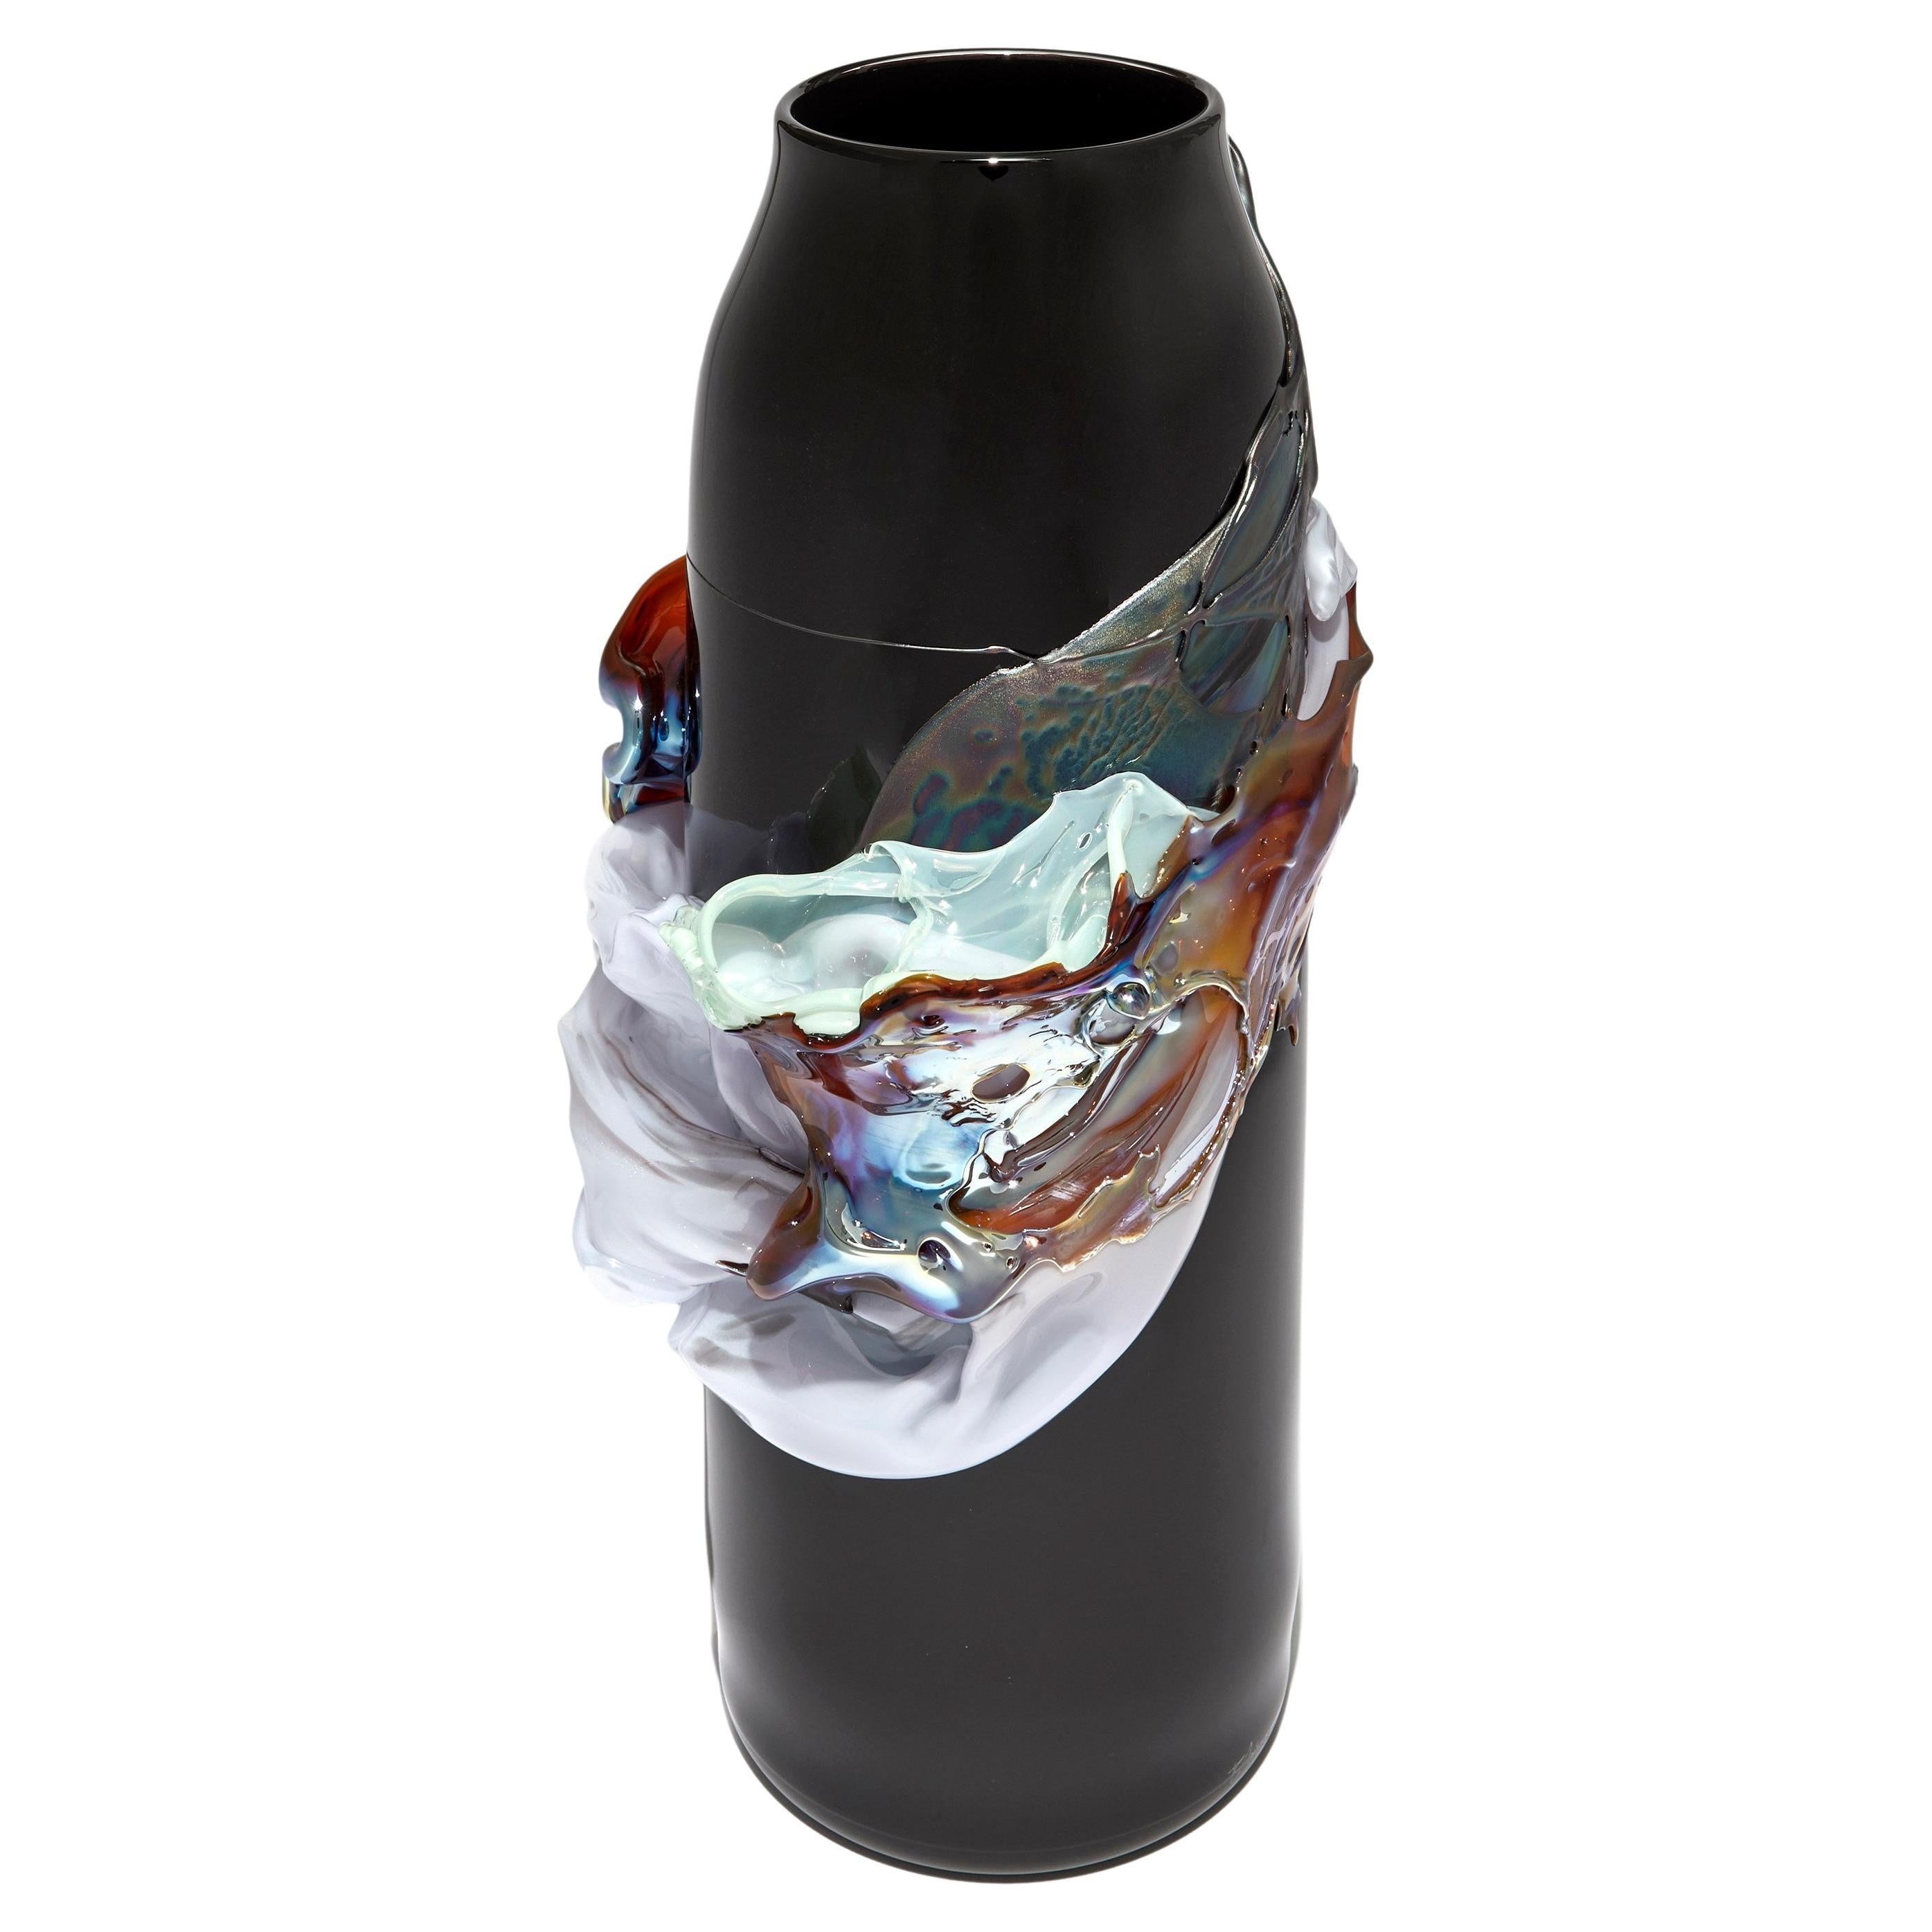 Panorama in Iridescence, a Black & Multicoloured Glass Vase by Bethany Wood